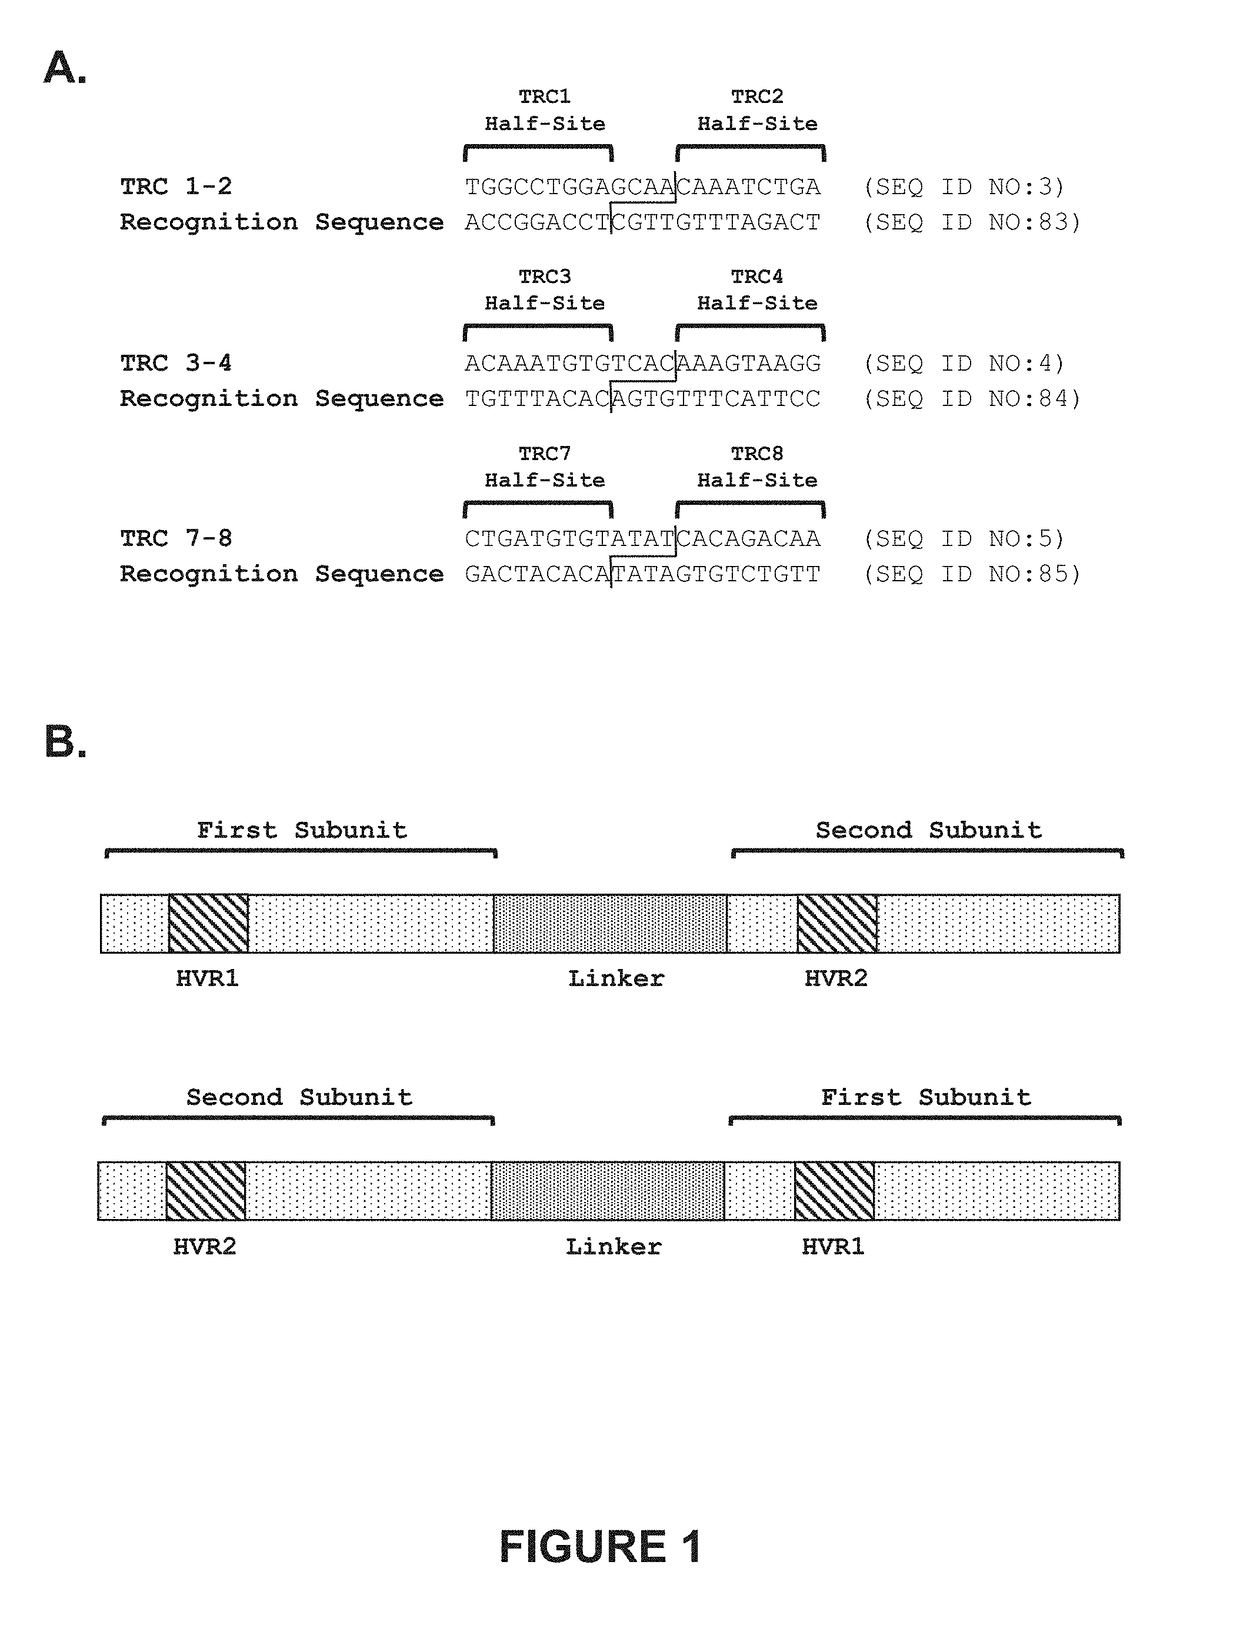 Genetically-modified cells comprising a modified human t cell receptor alpha constant region gene